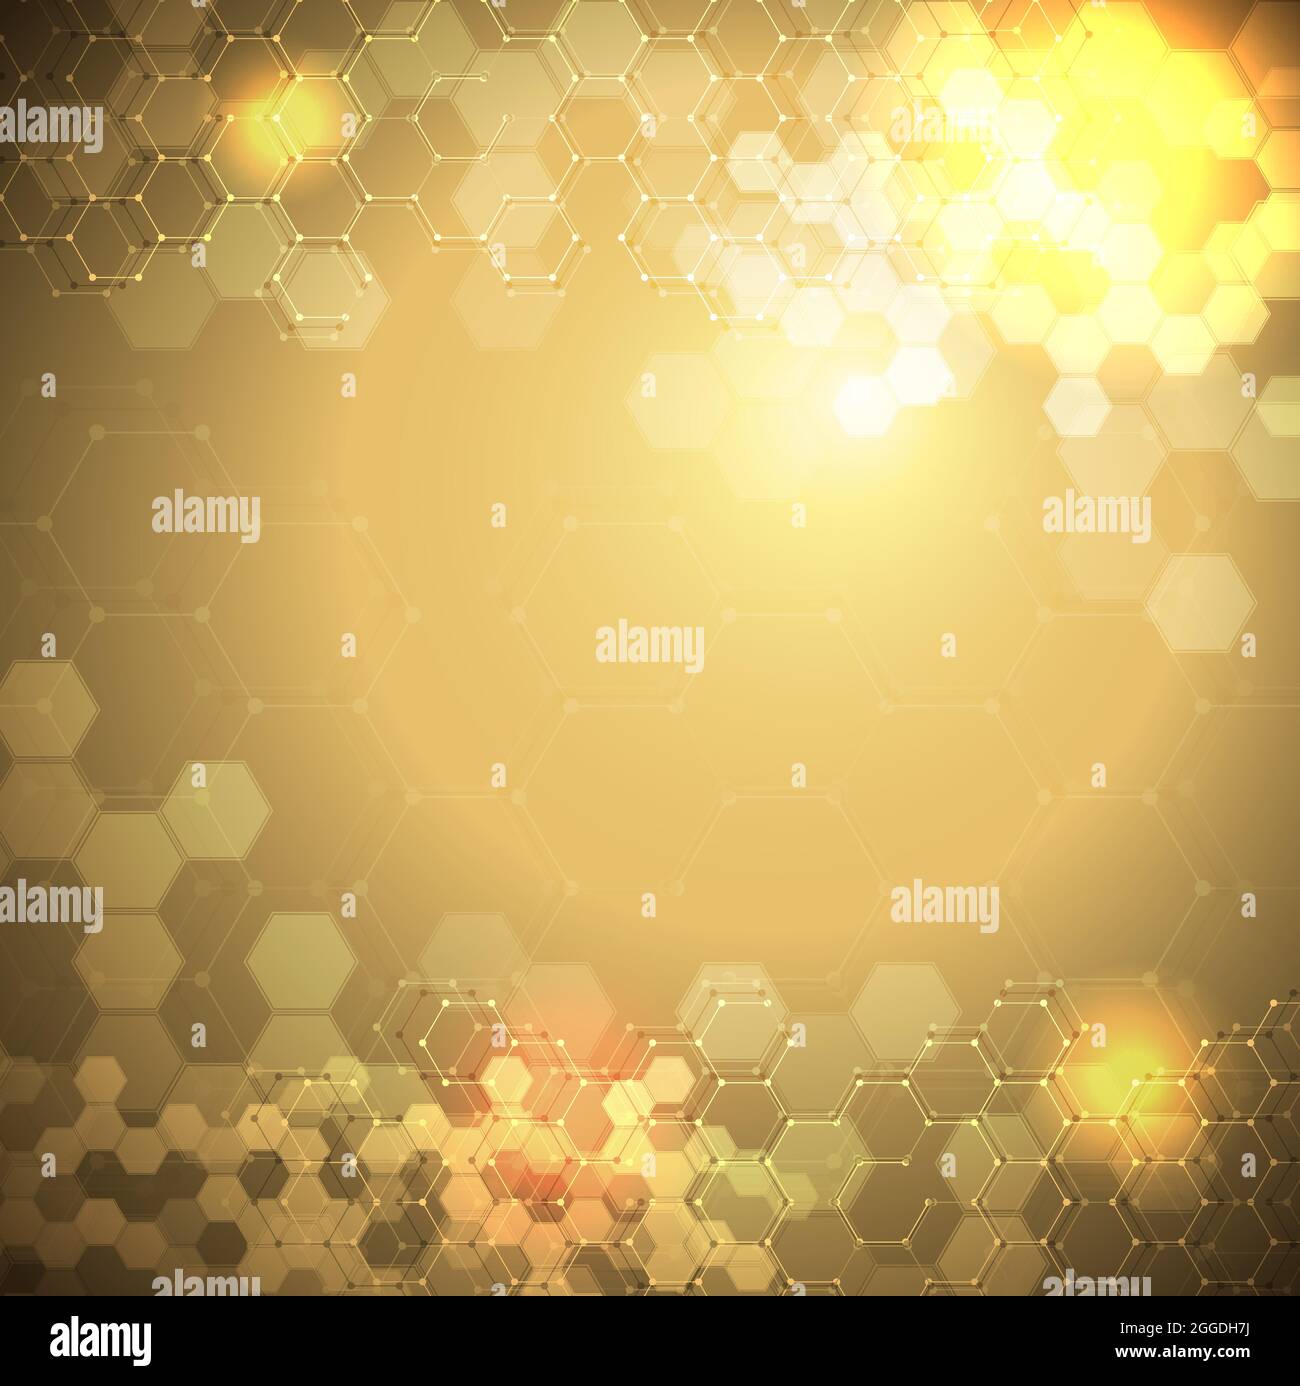 EPS 10 vector abstract science and futuristic hexagonal technology concept background. Digital image with golden light effects and blurs over darker b Stock Vector